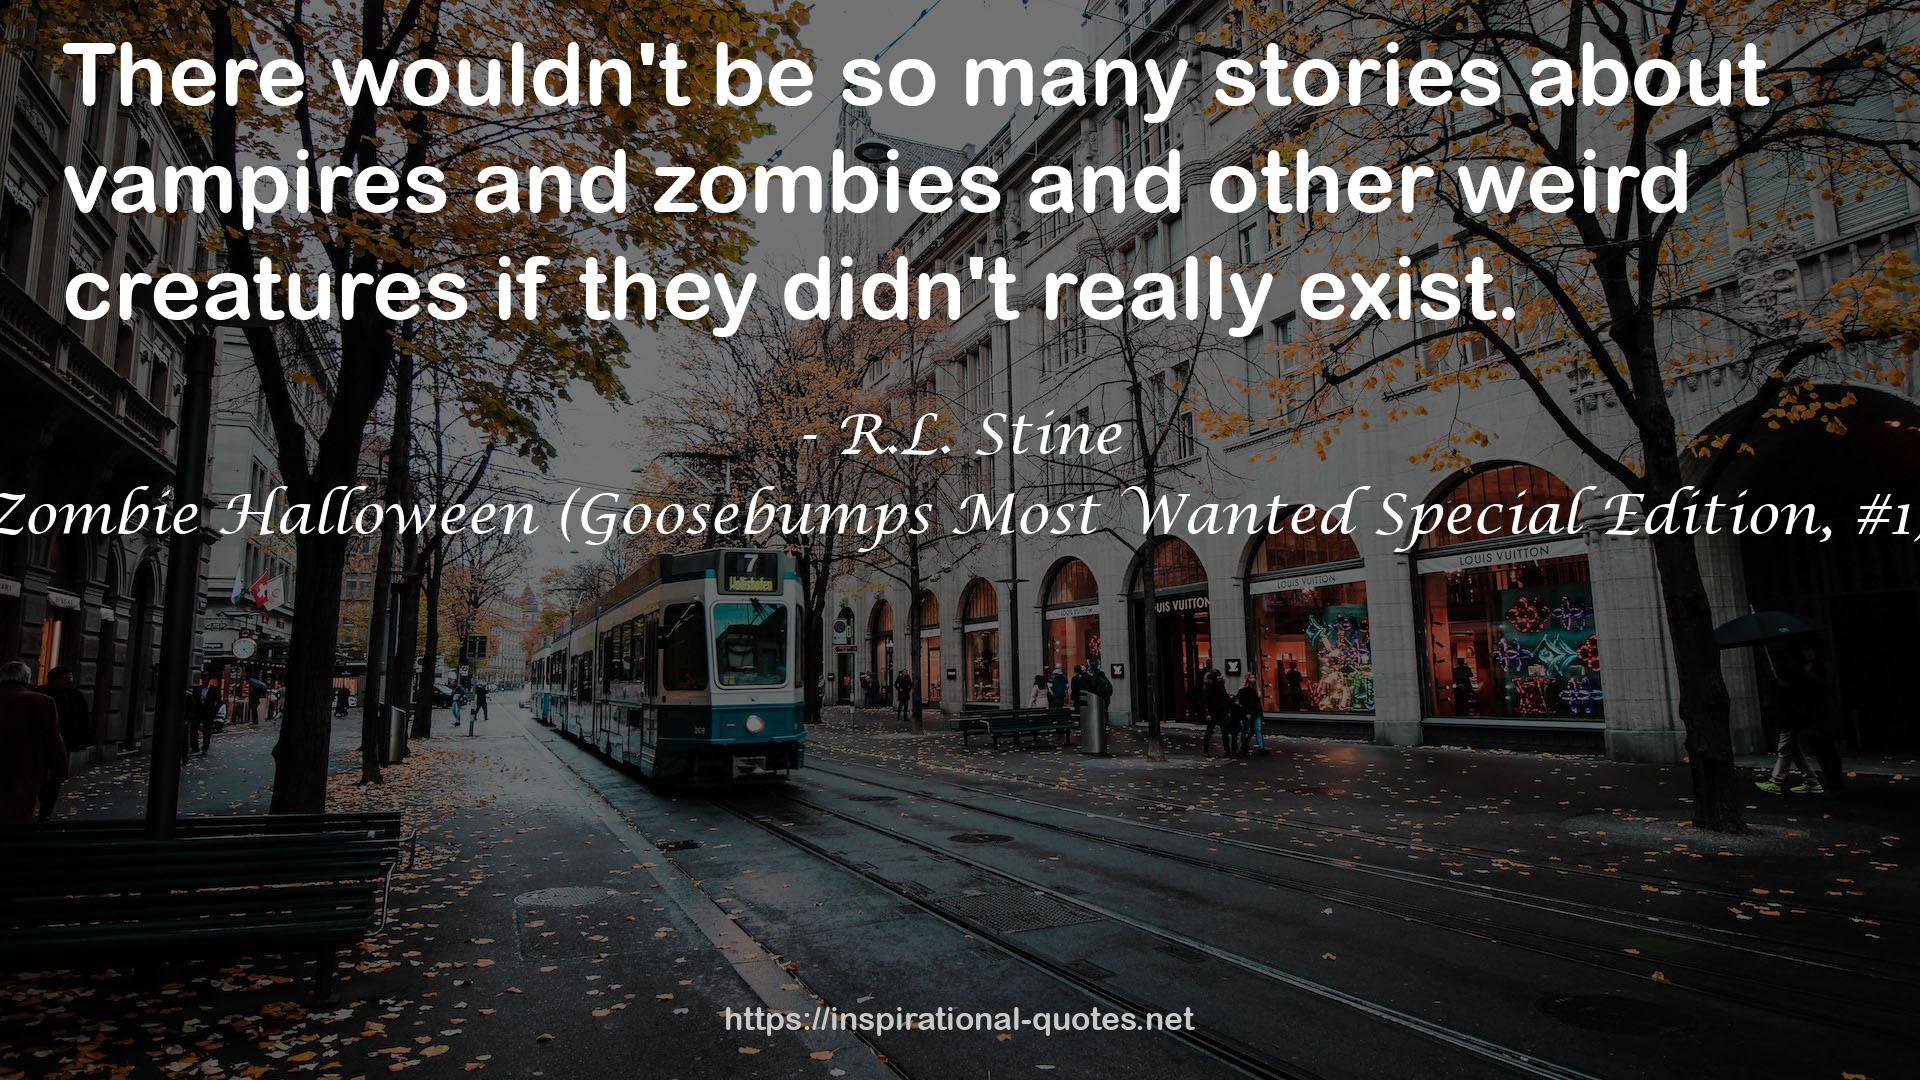 Zombie Halloween (Goosebumps Most Wanted Special Edition, #1) QUOTES